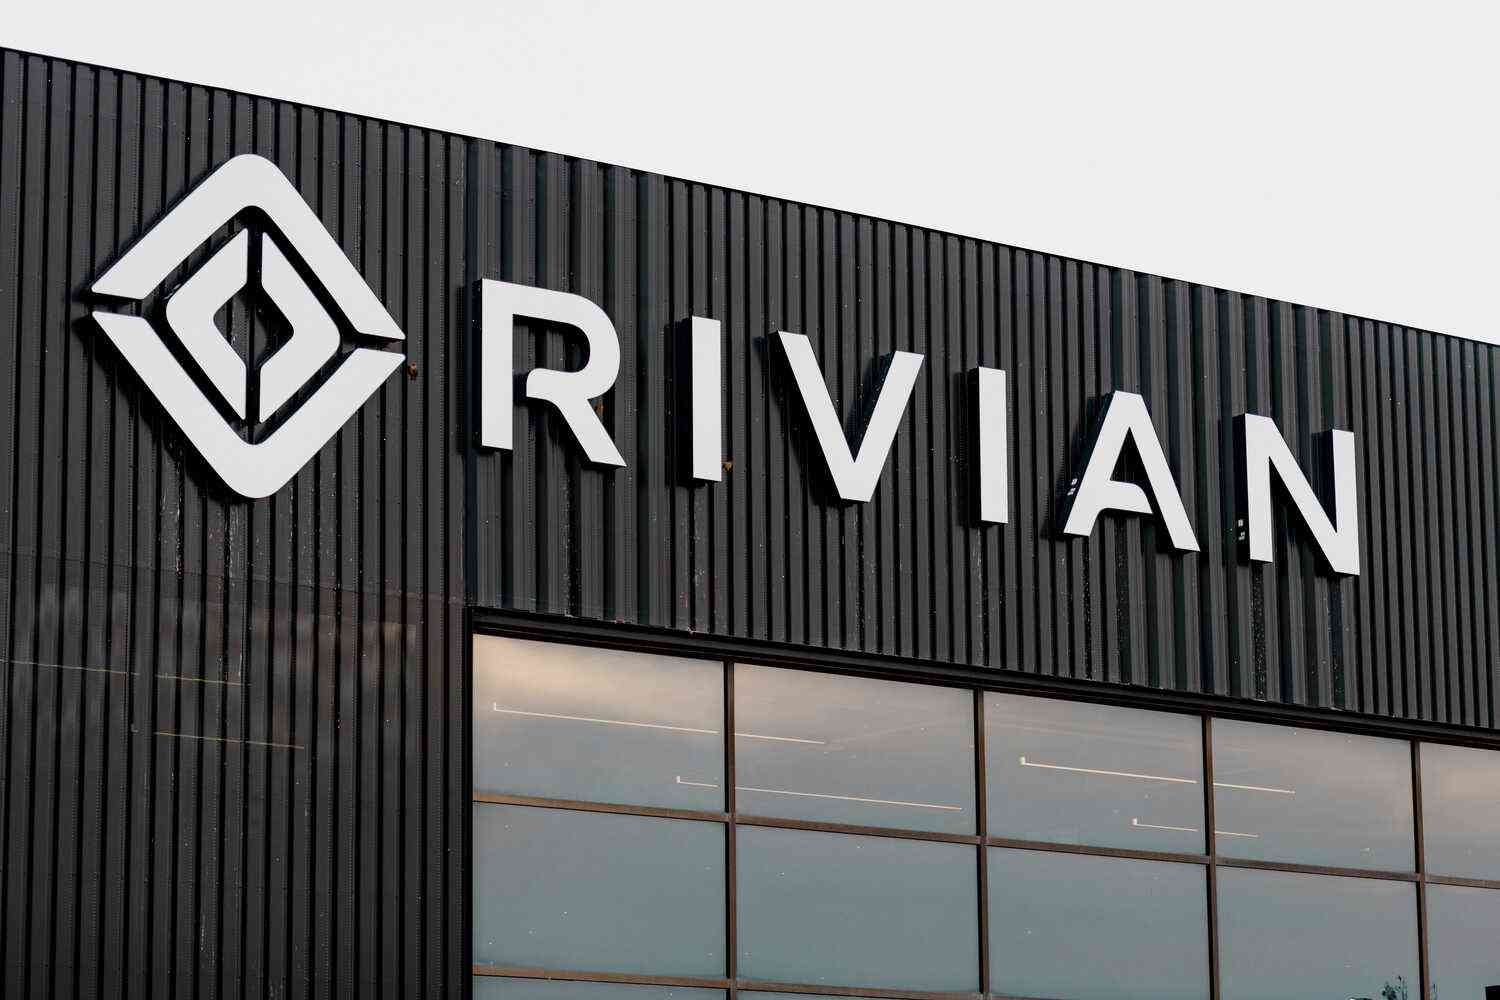 Electric-car start-up Rivian files to sell $1 billion of shares